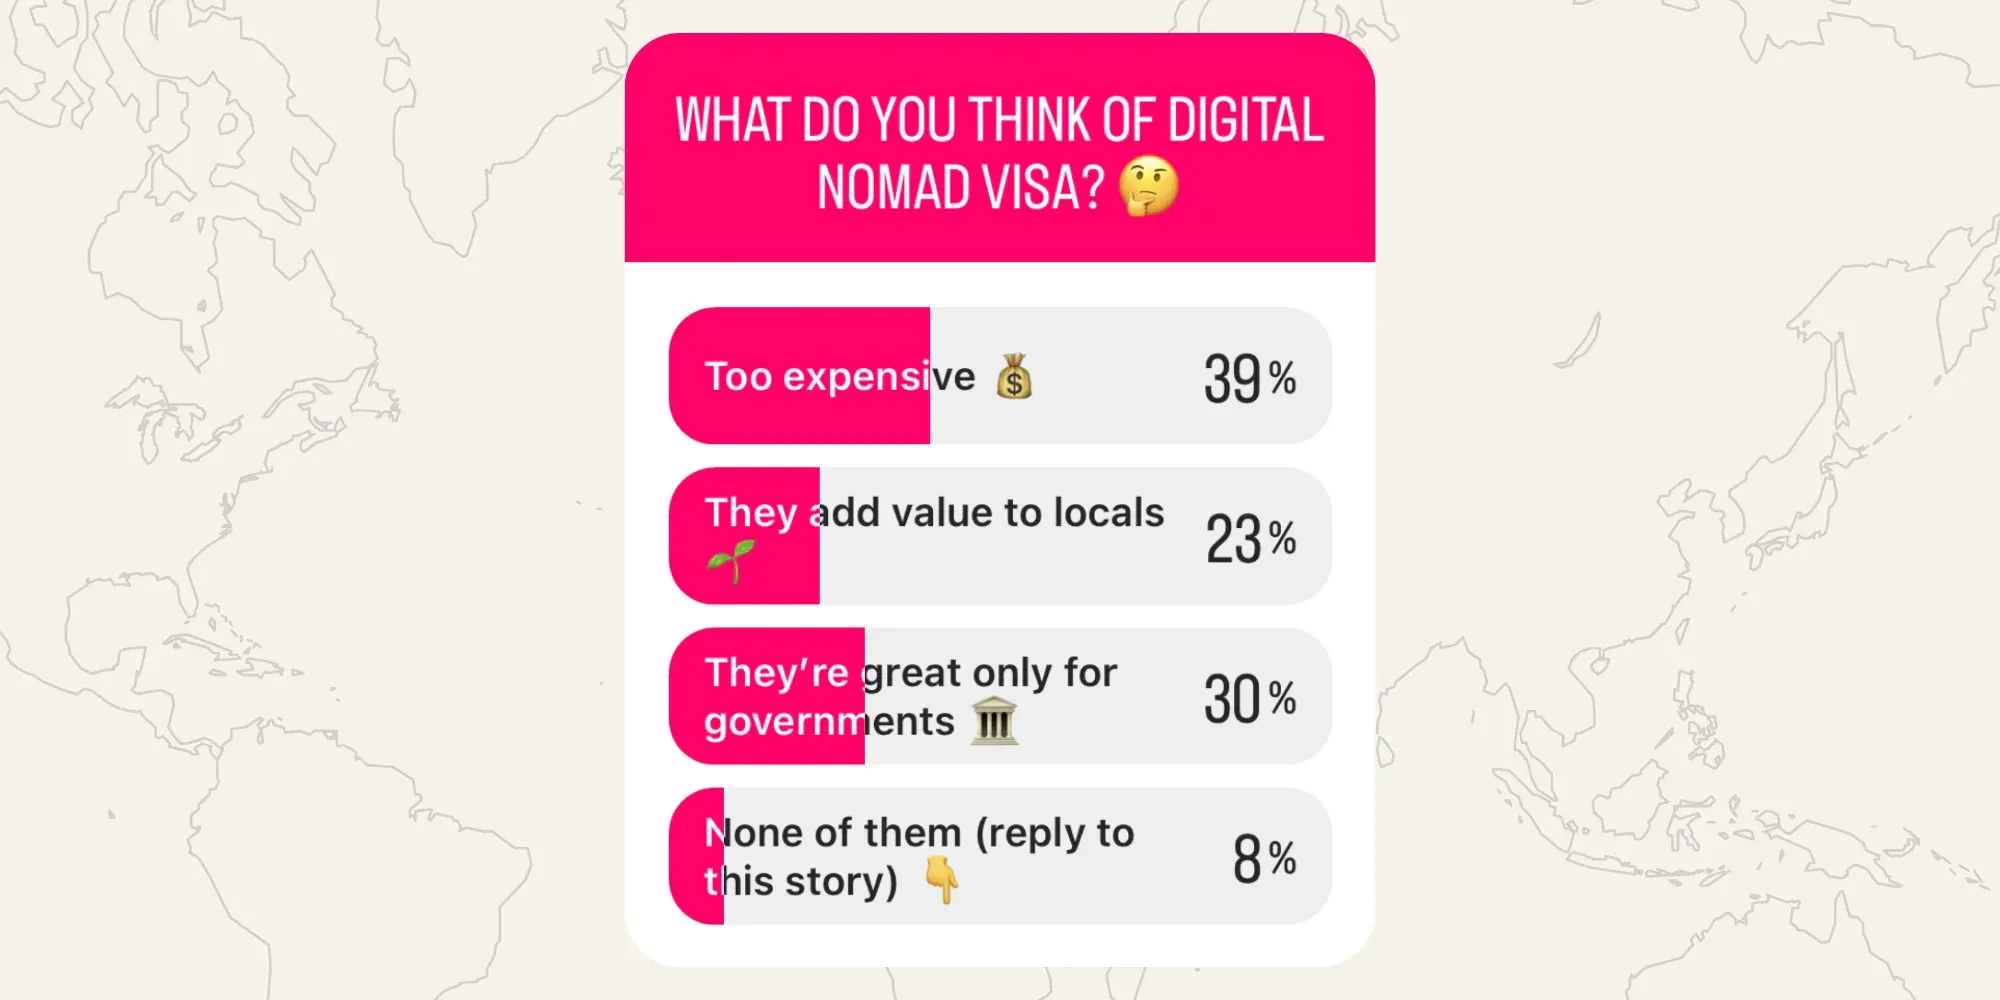 A recent poll about digital nomad visas and its results